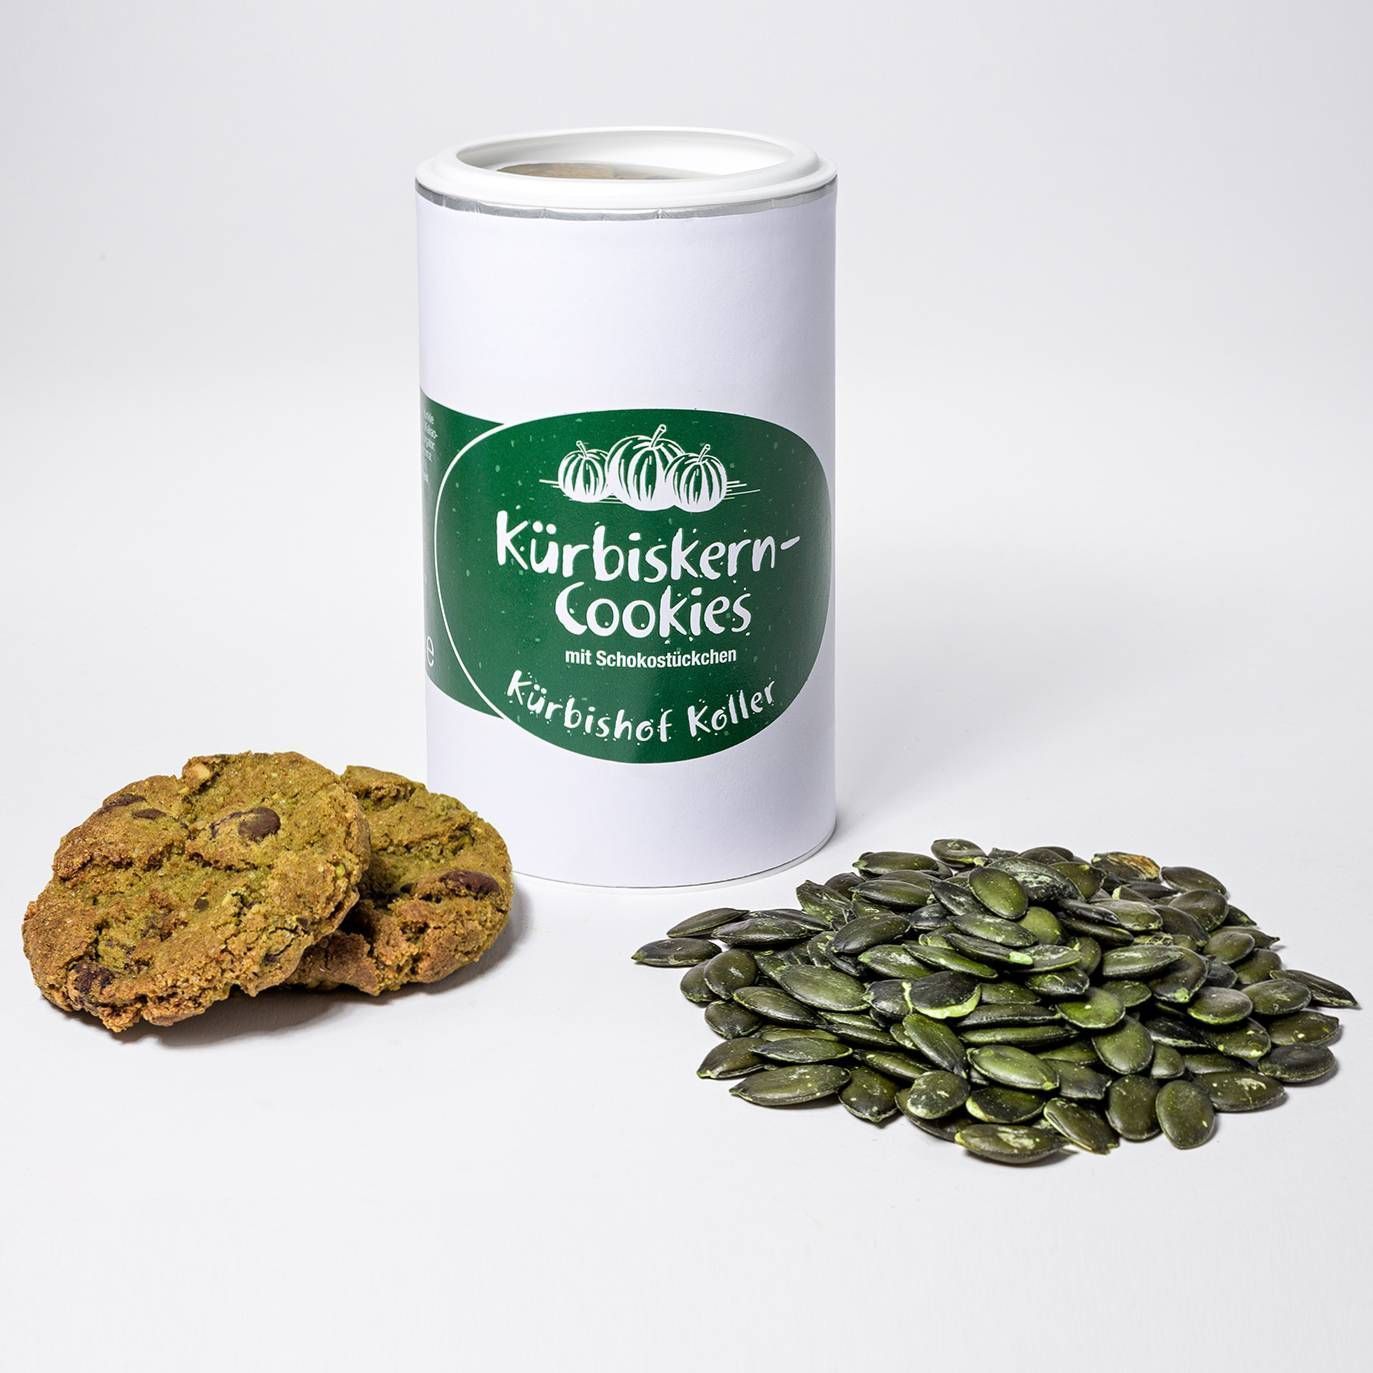 Pumpkin Seed Cookies with Chocolate Chips in Cuba